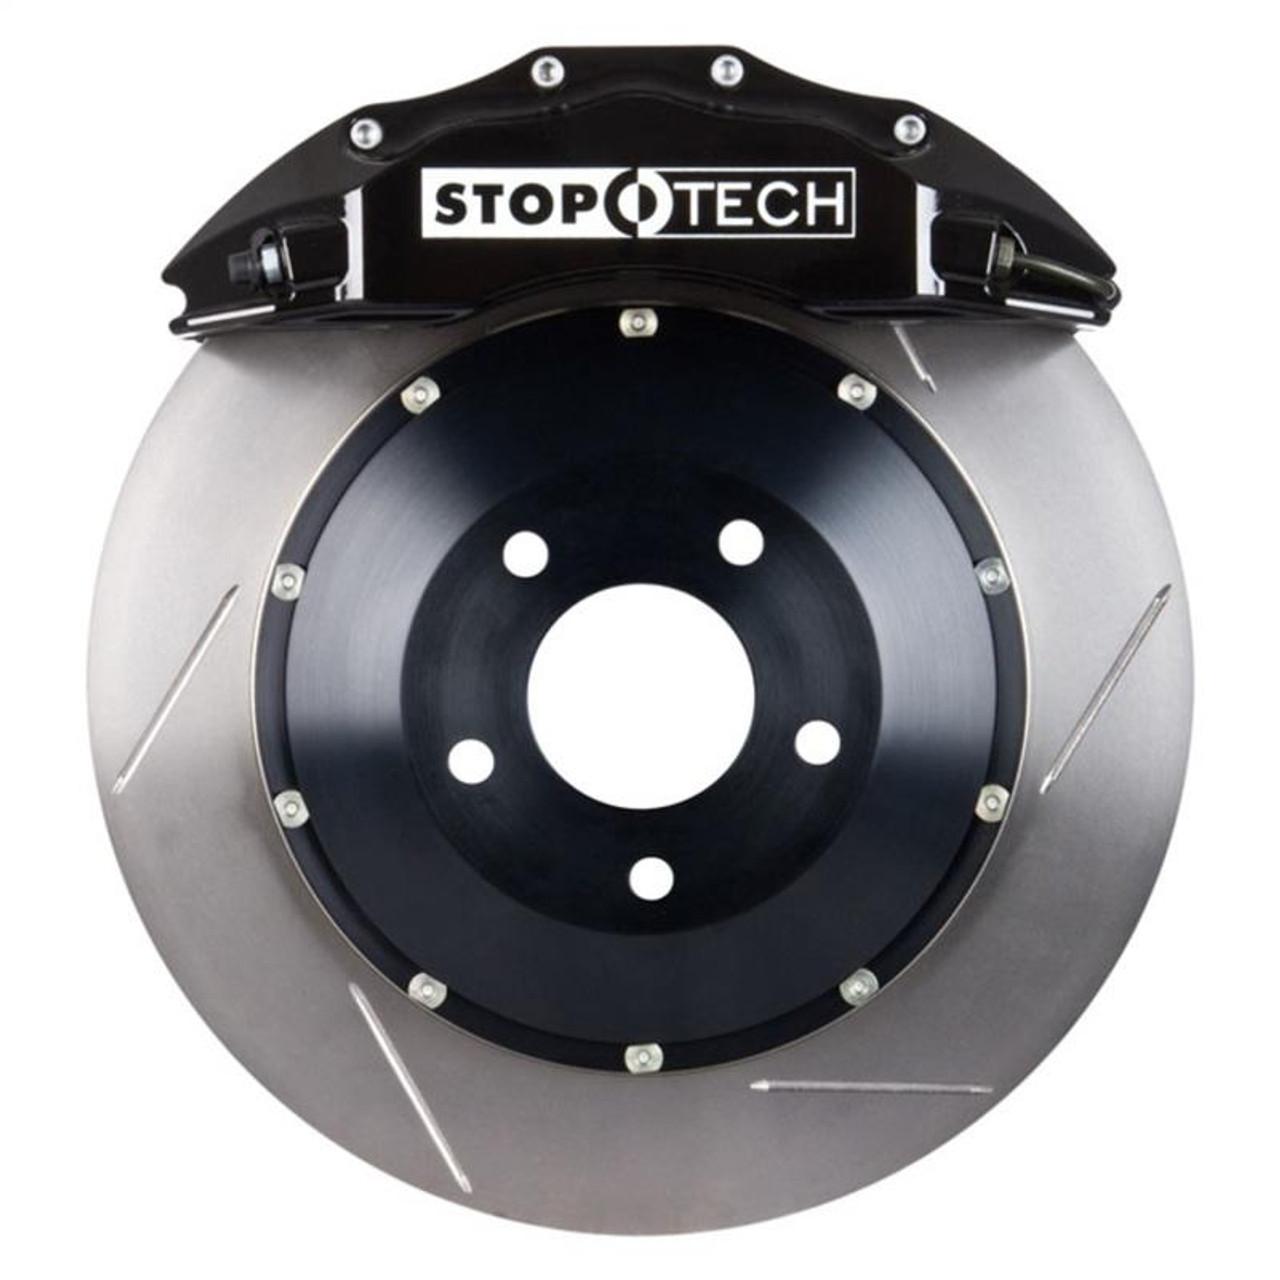 Stoptech StopTech 12-13 Volkswagen Golf ST-60 Black Calipers 355x32mm Slotted Rotors Front Big Brake Kit - 83.894.6700.51